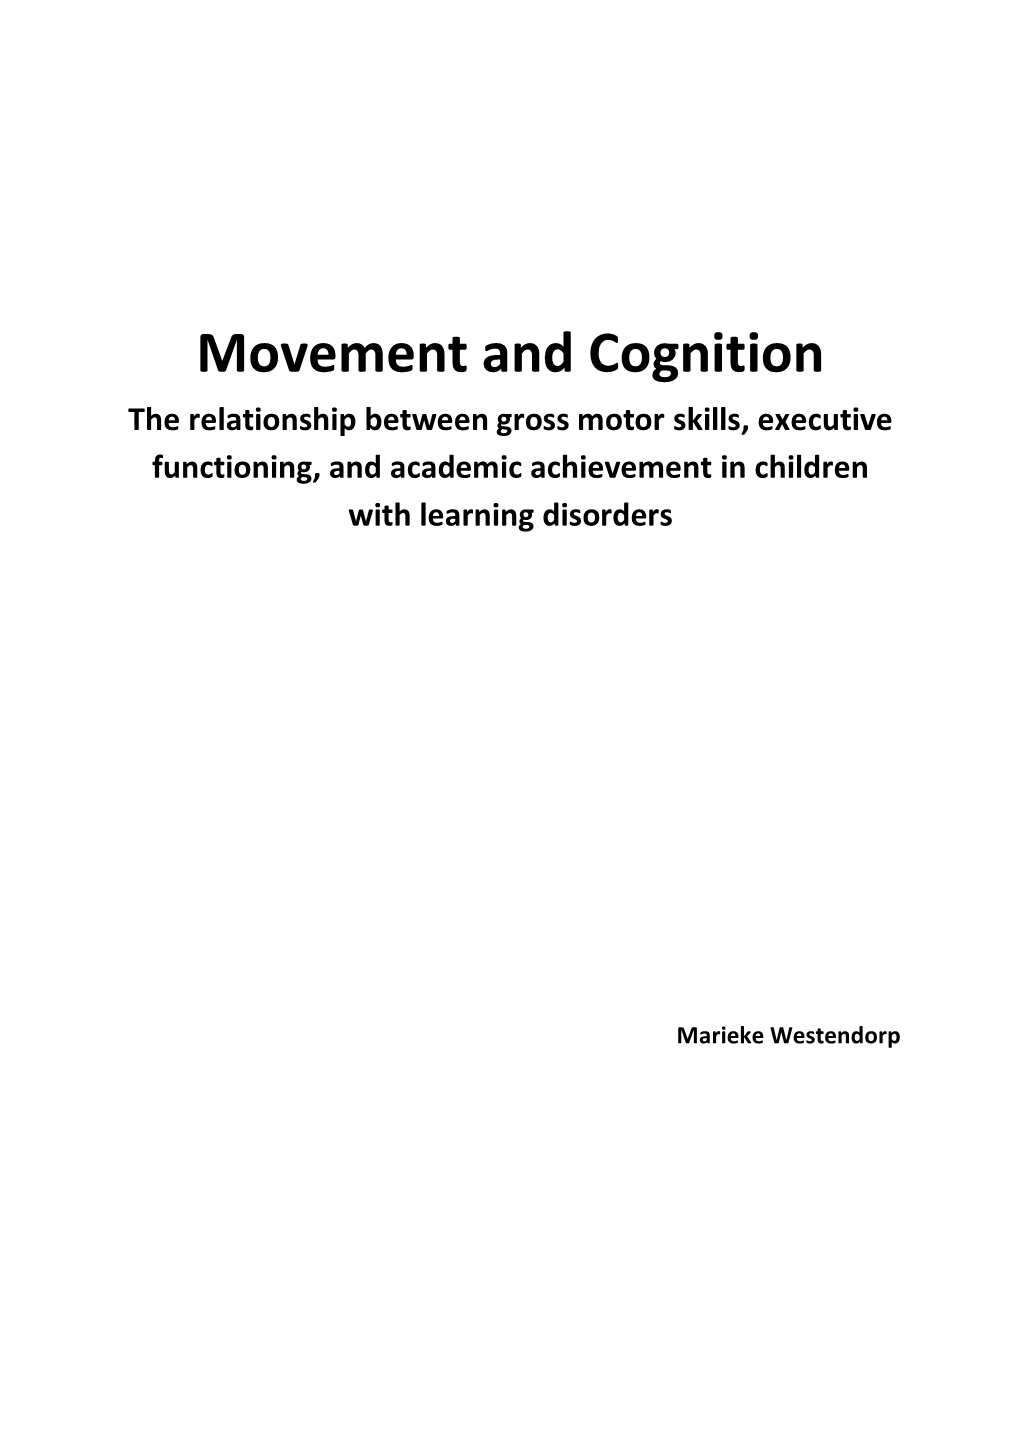 Movement and Cognition the Relationship Between Gross Motor Skills, Executive Functioning, and Academic Achievement in Children with Learning Disorders